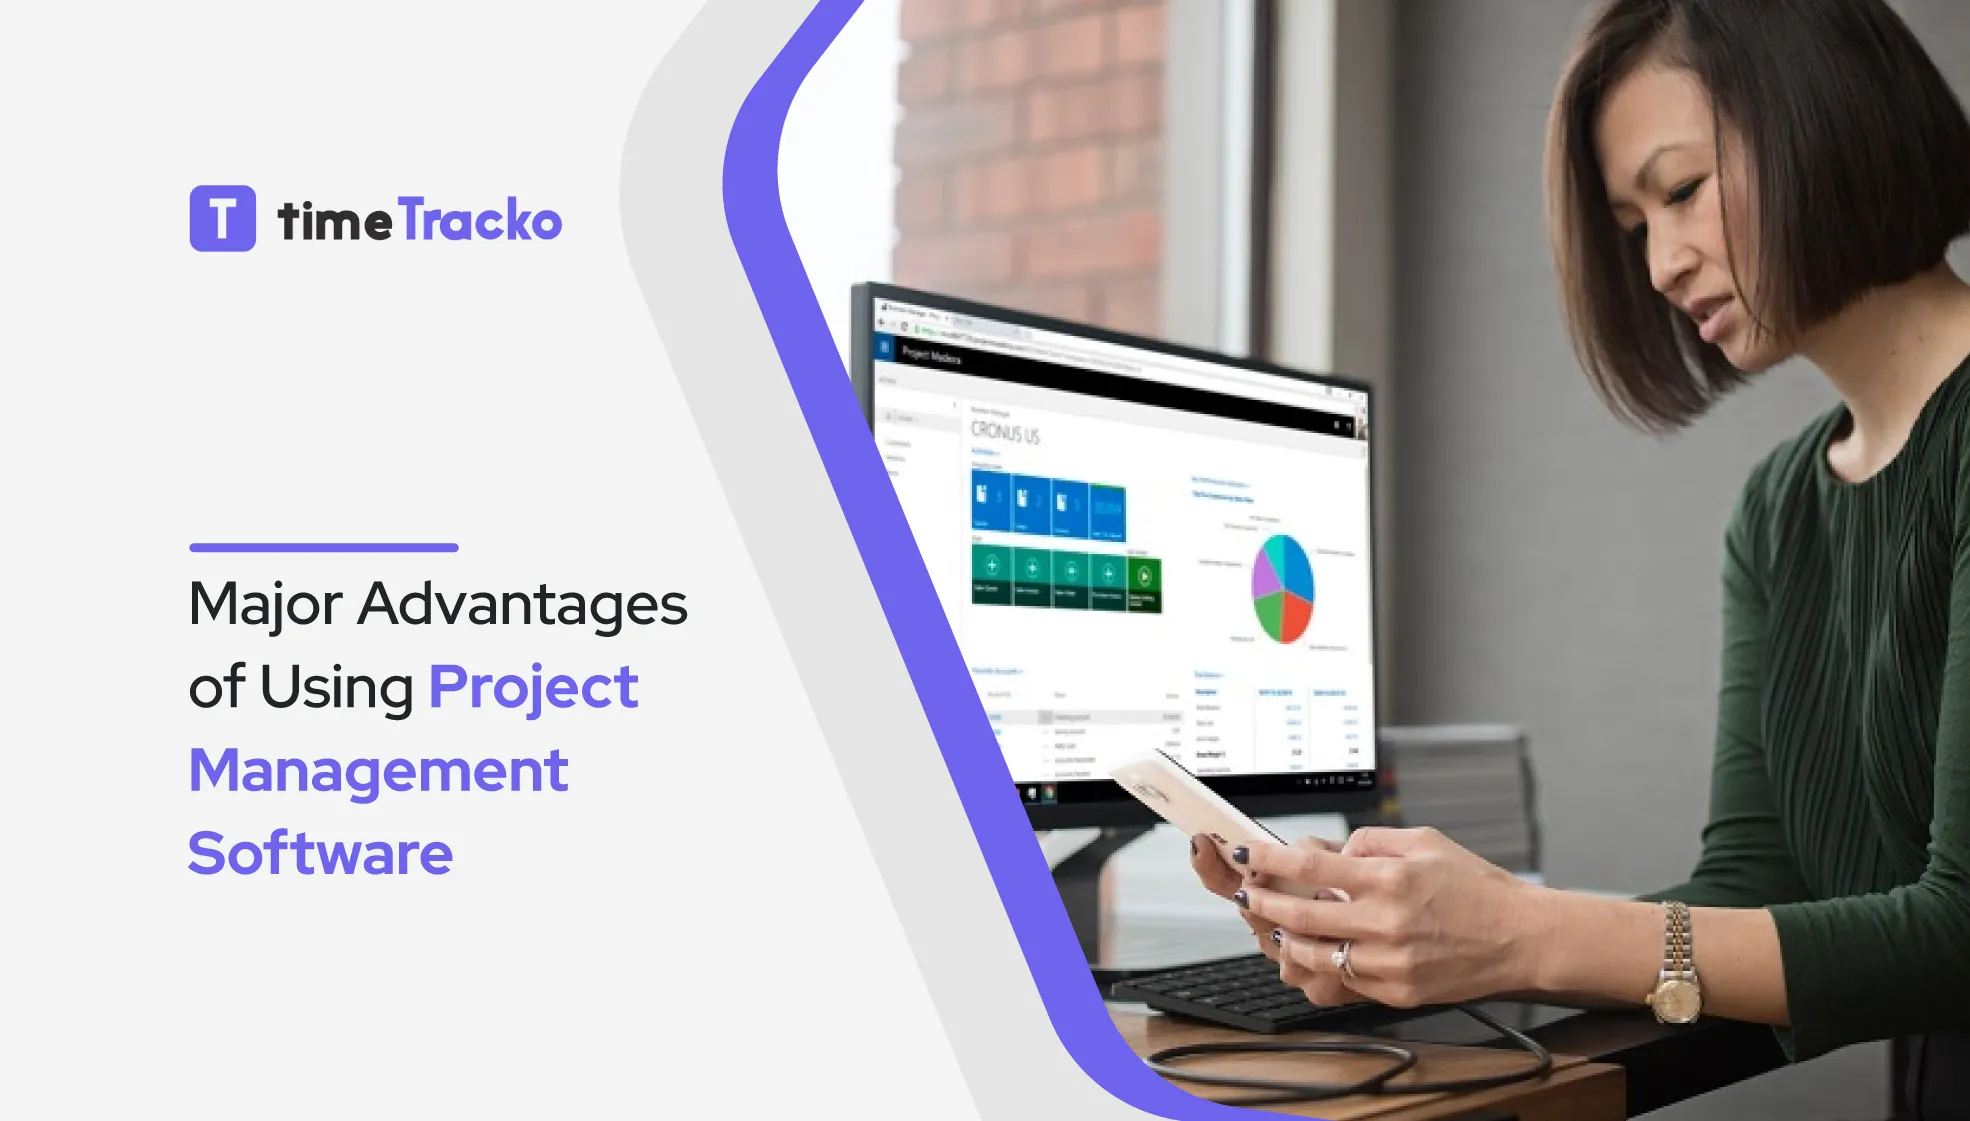 Major Advantages of Using Project Management Software